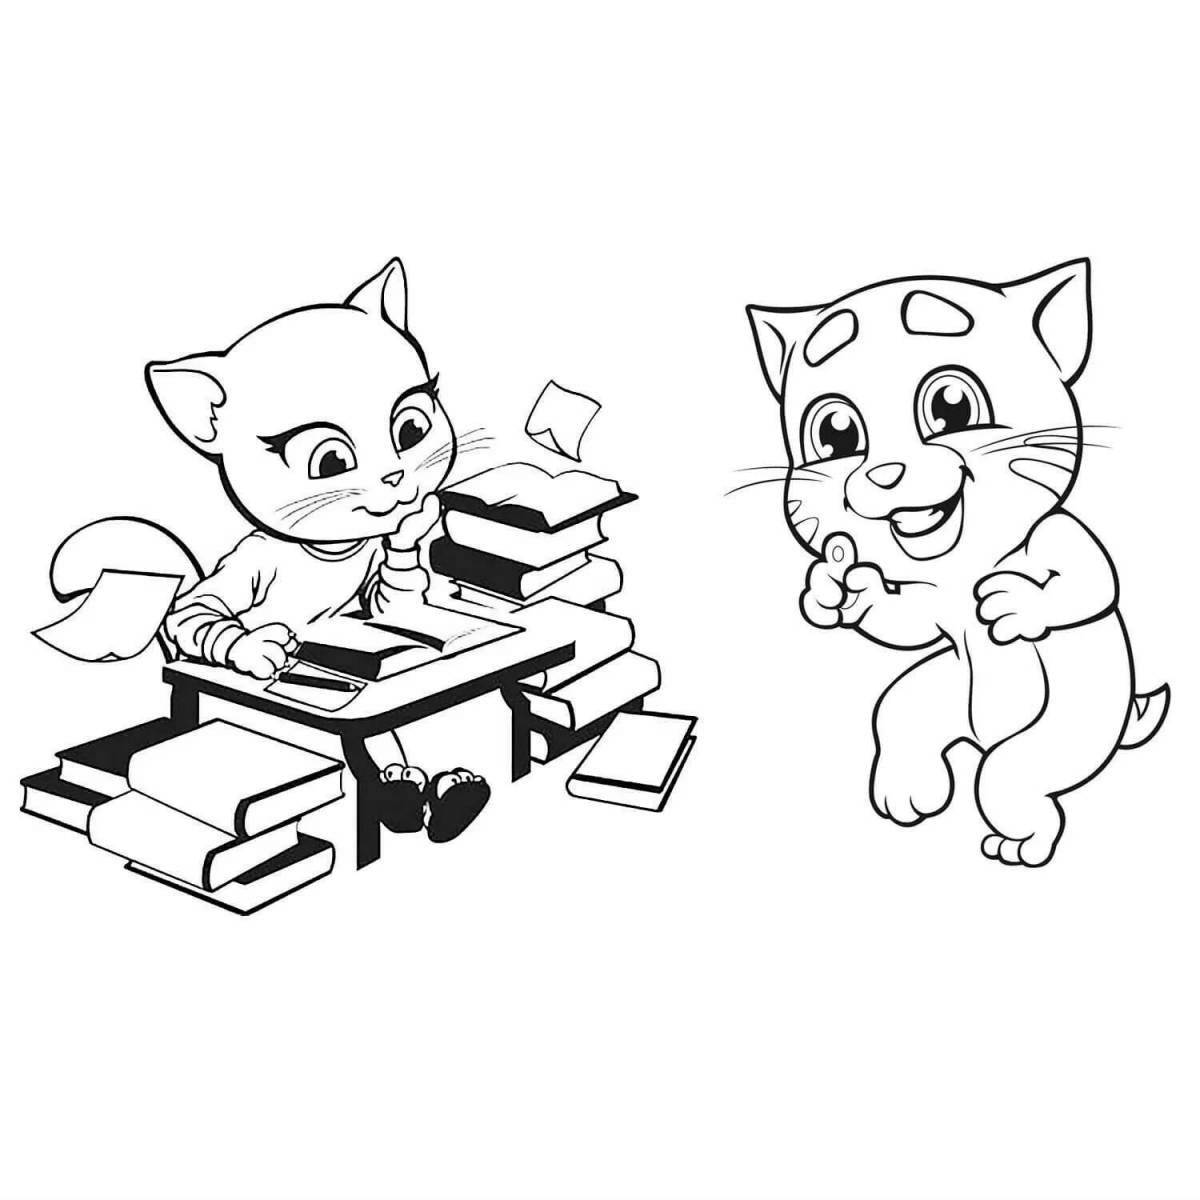 Tom and Angela funny coloring pages for kids